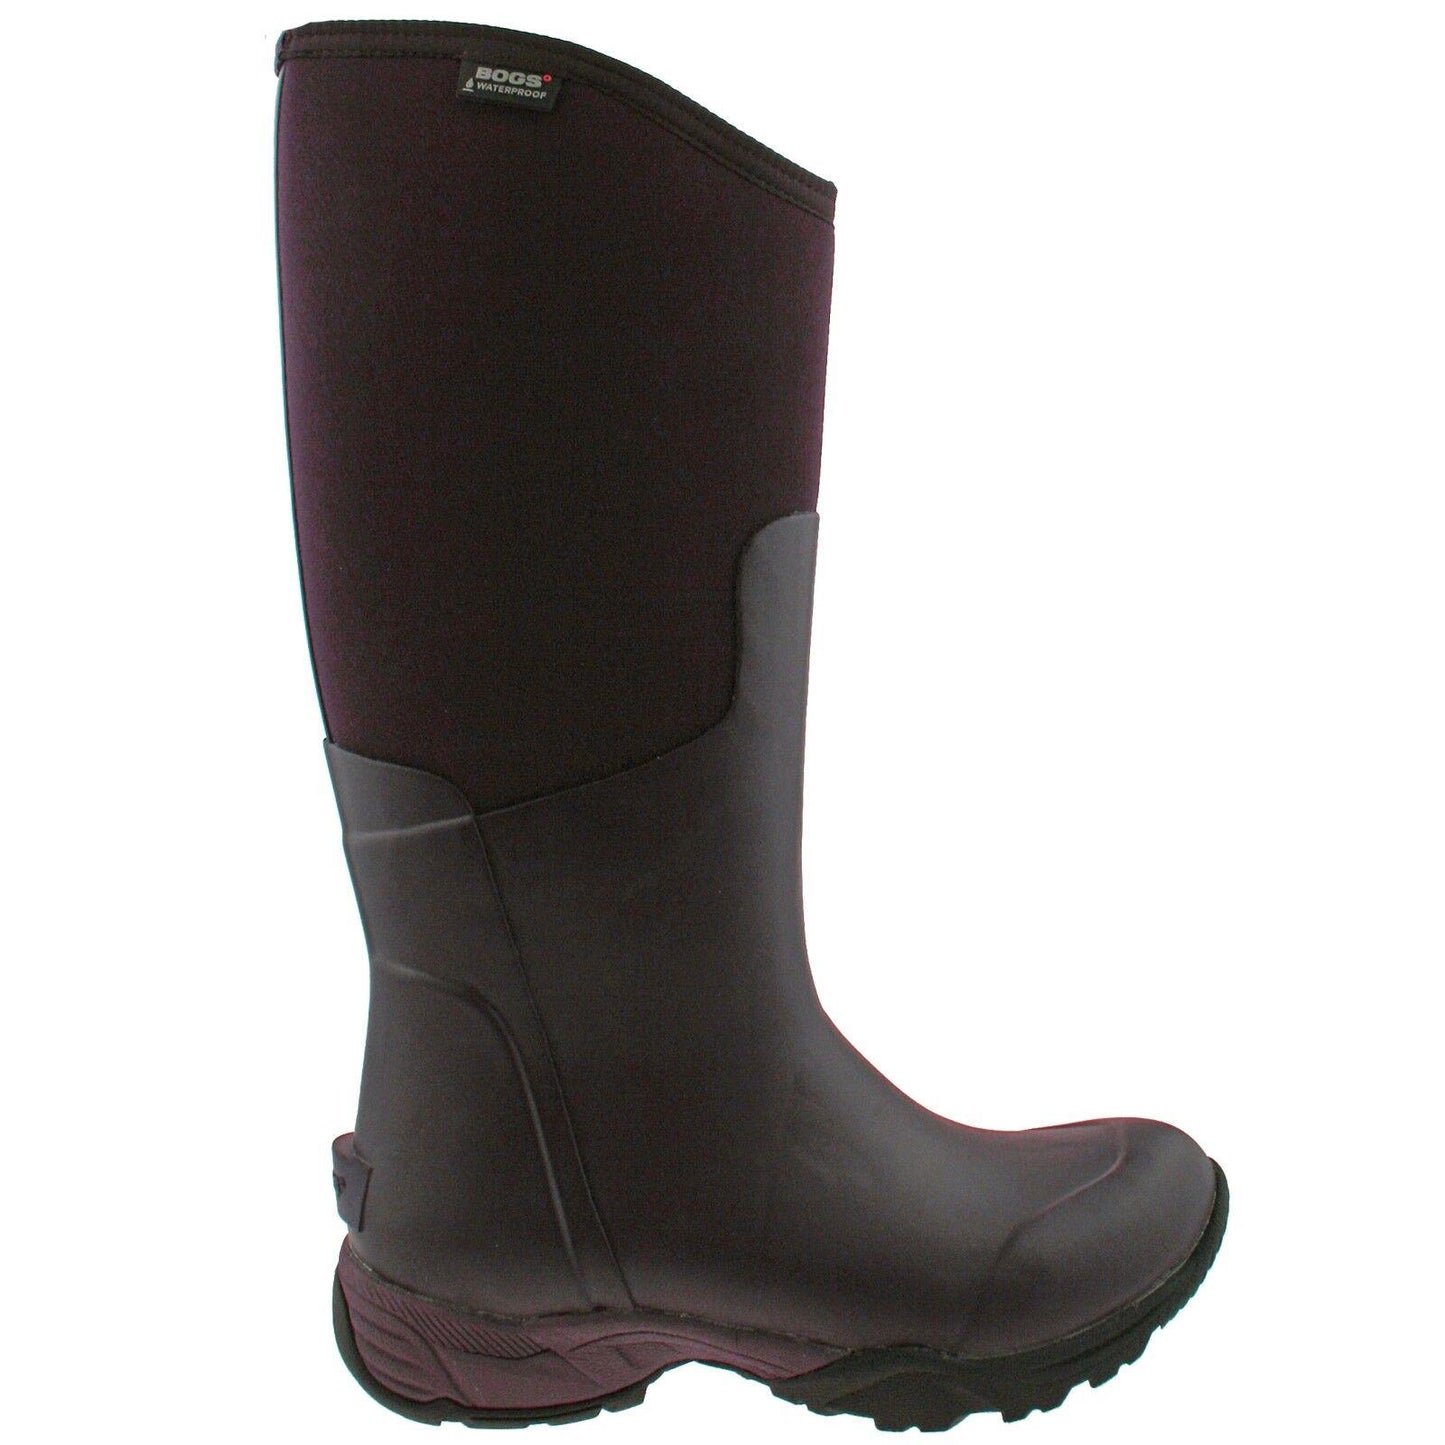 Ladies Bogs Essential Tall Solid Aubergine Insulated Warm Wellies Boot 78583 550